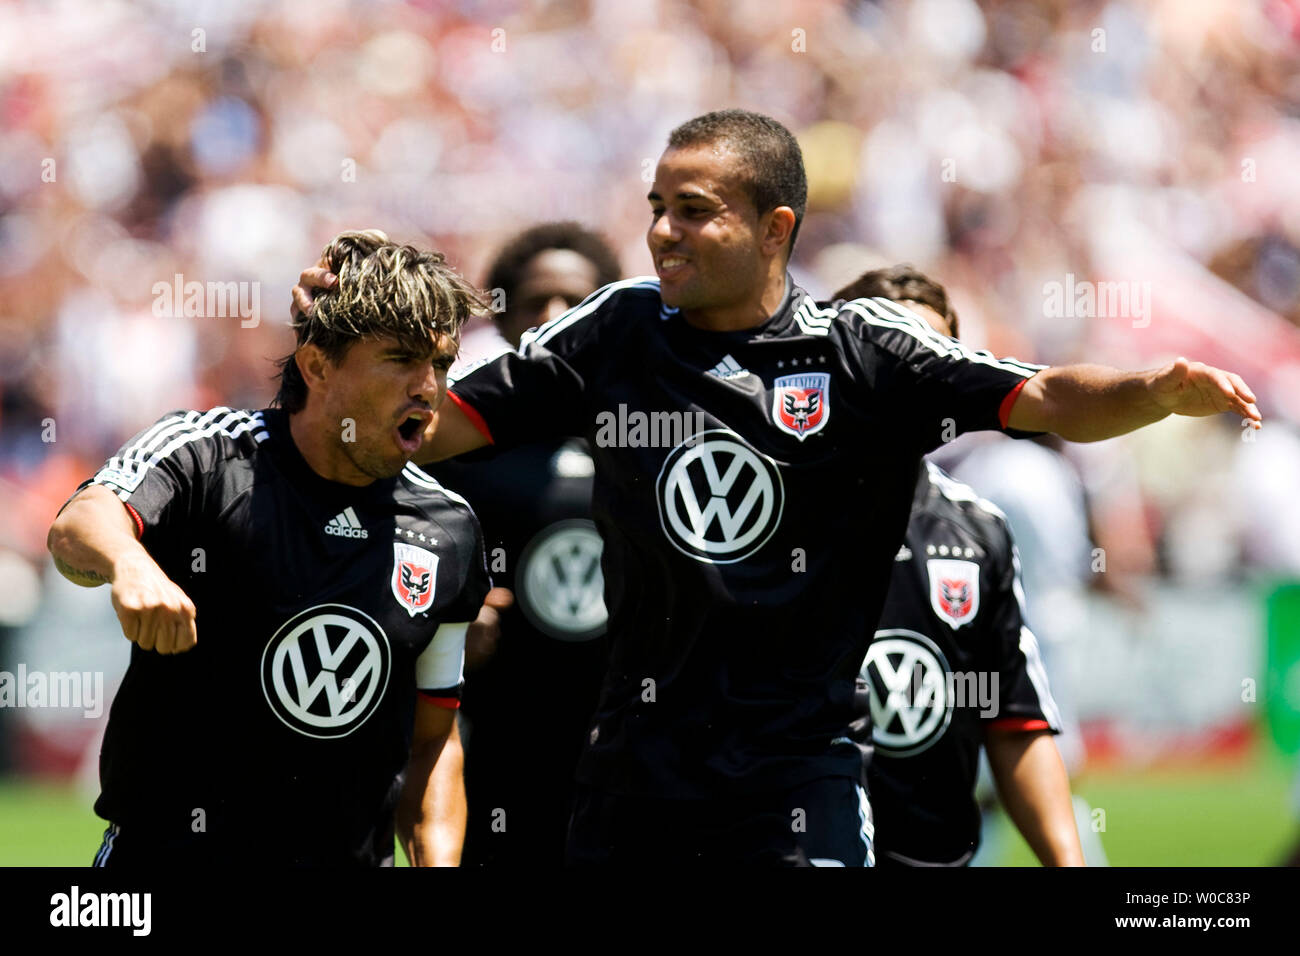 D.C. United's Jaime Moreno (99) celebrates with his teammate Marcelo Gallardo (10) after scoring on a penalty kick during the 5th minute of the 1st half against the Los Angeles Galaxy at RFK Stadium in Washington on June 29, 2008. (UPI Photo/Patrick D. McDermott) Stock Photo